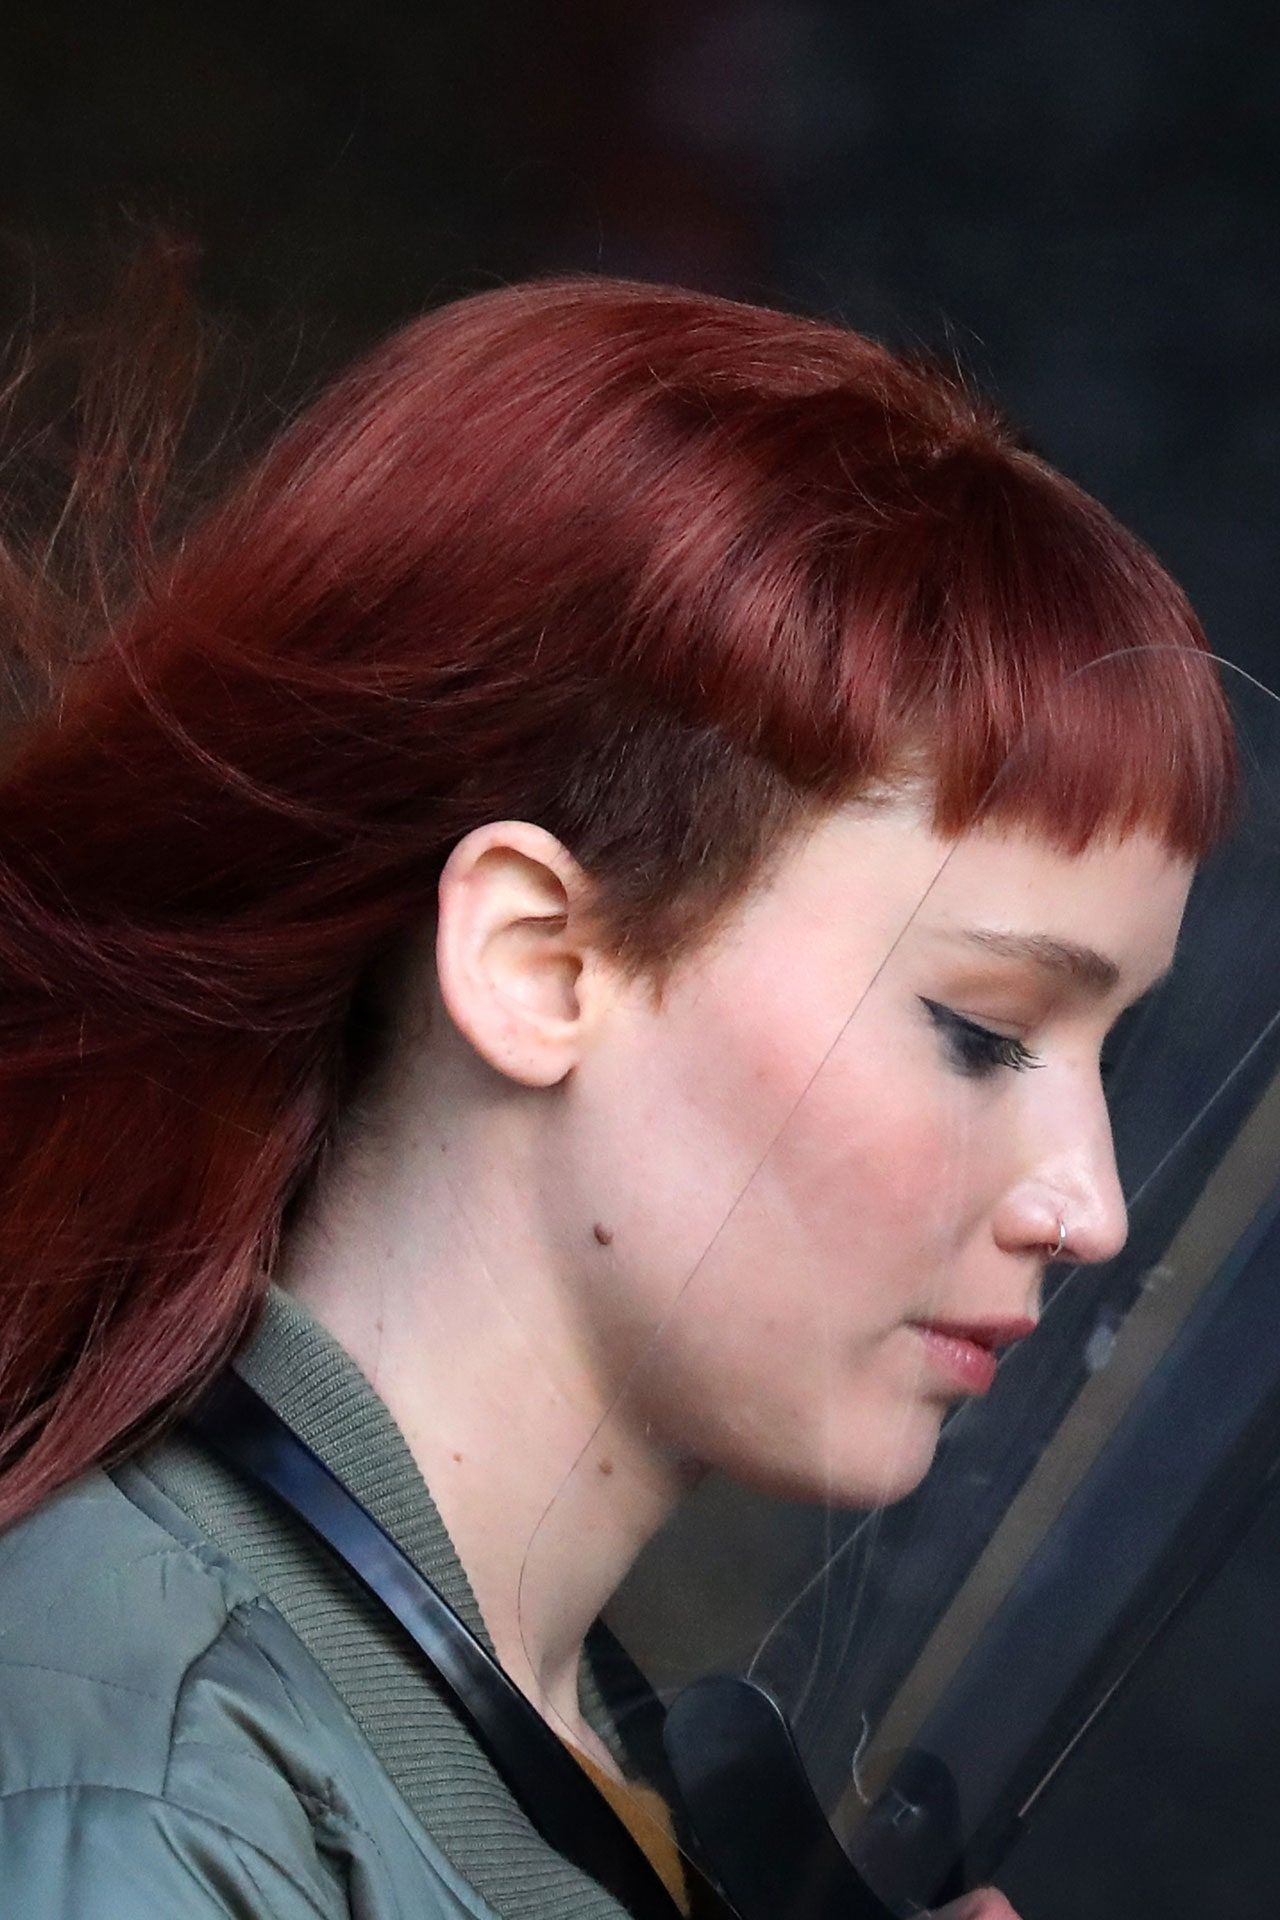 A woman with red hair and a nose ring looks down. - Jennifer Lawrence